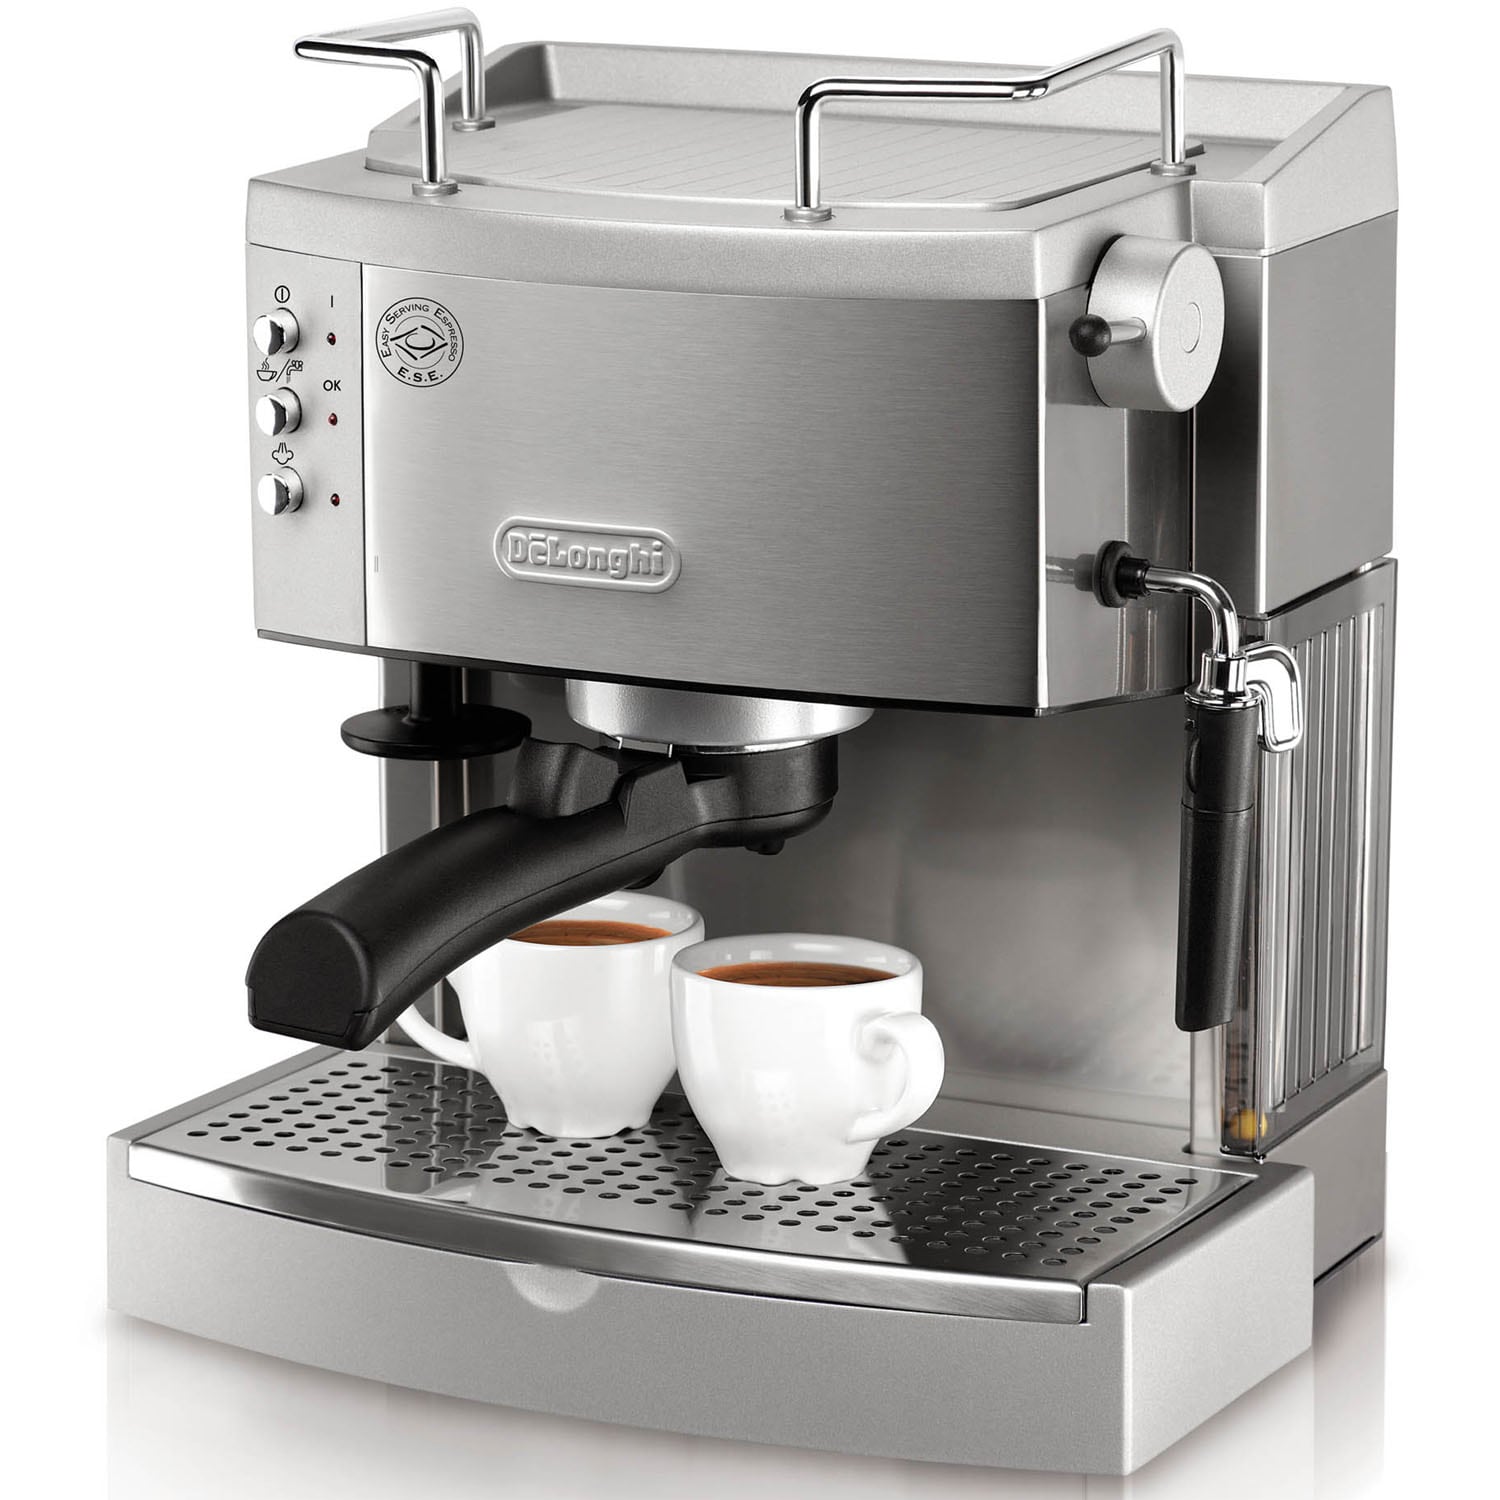 Manual at Steel Espresso Machine Stainless DeLonghi